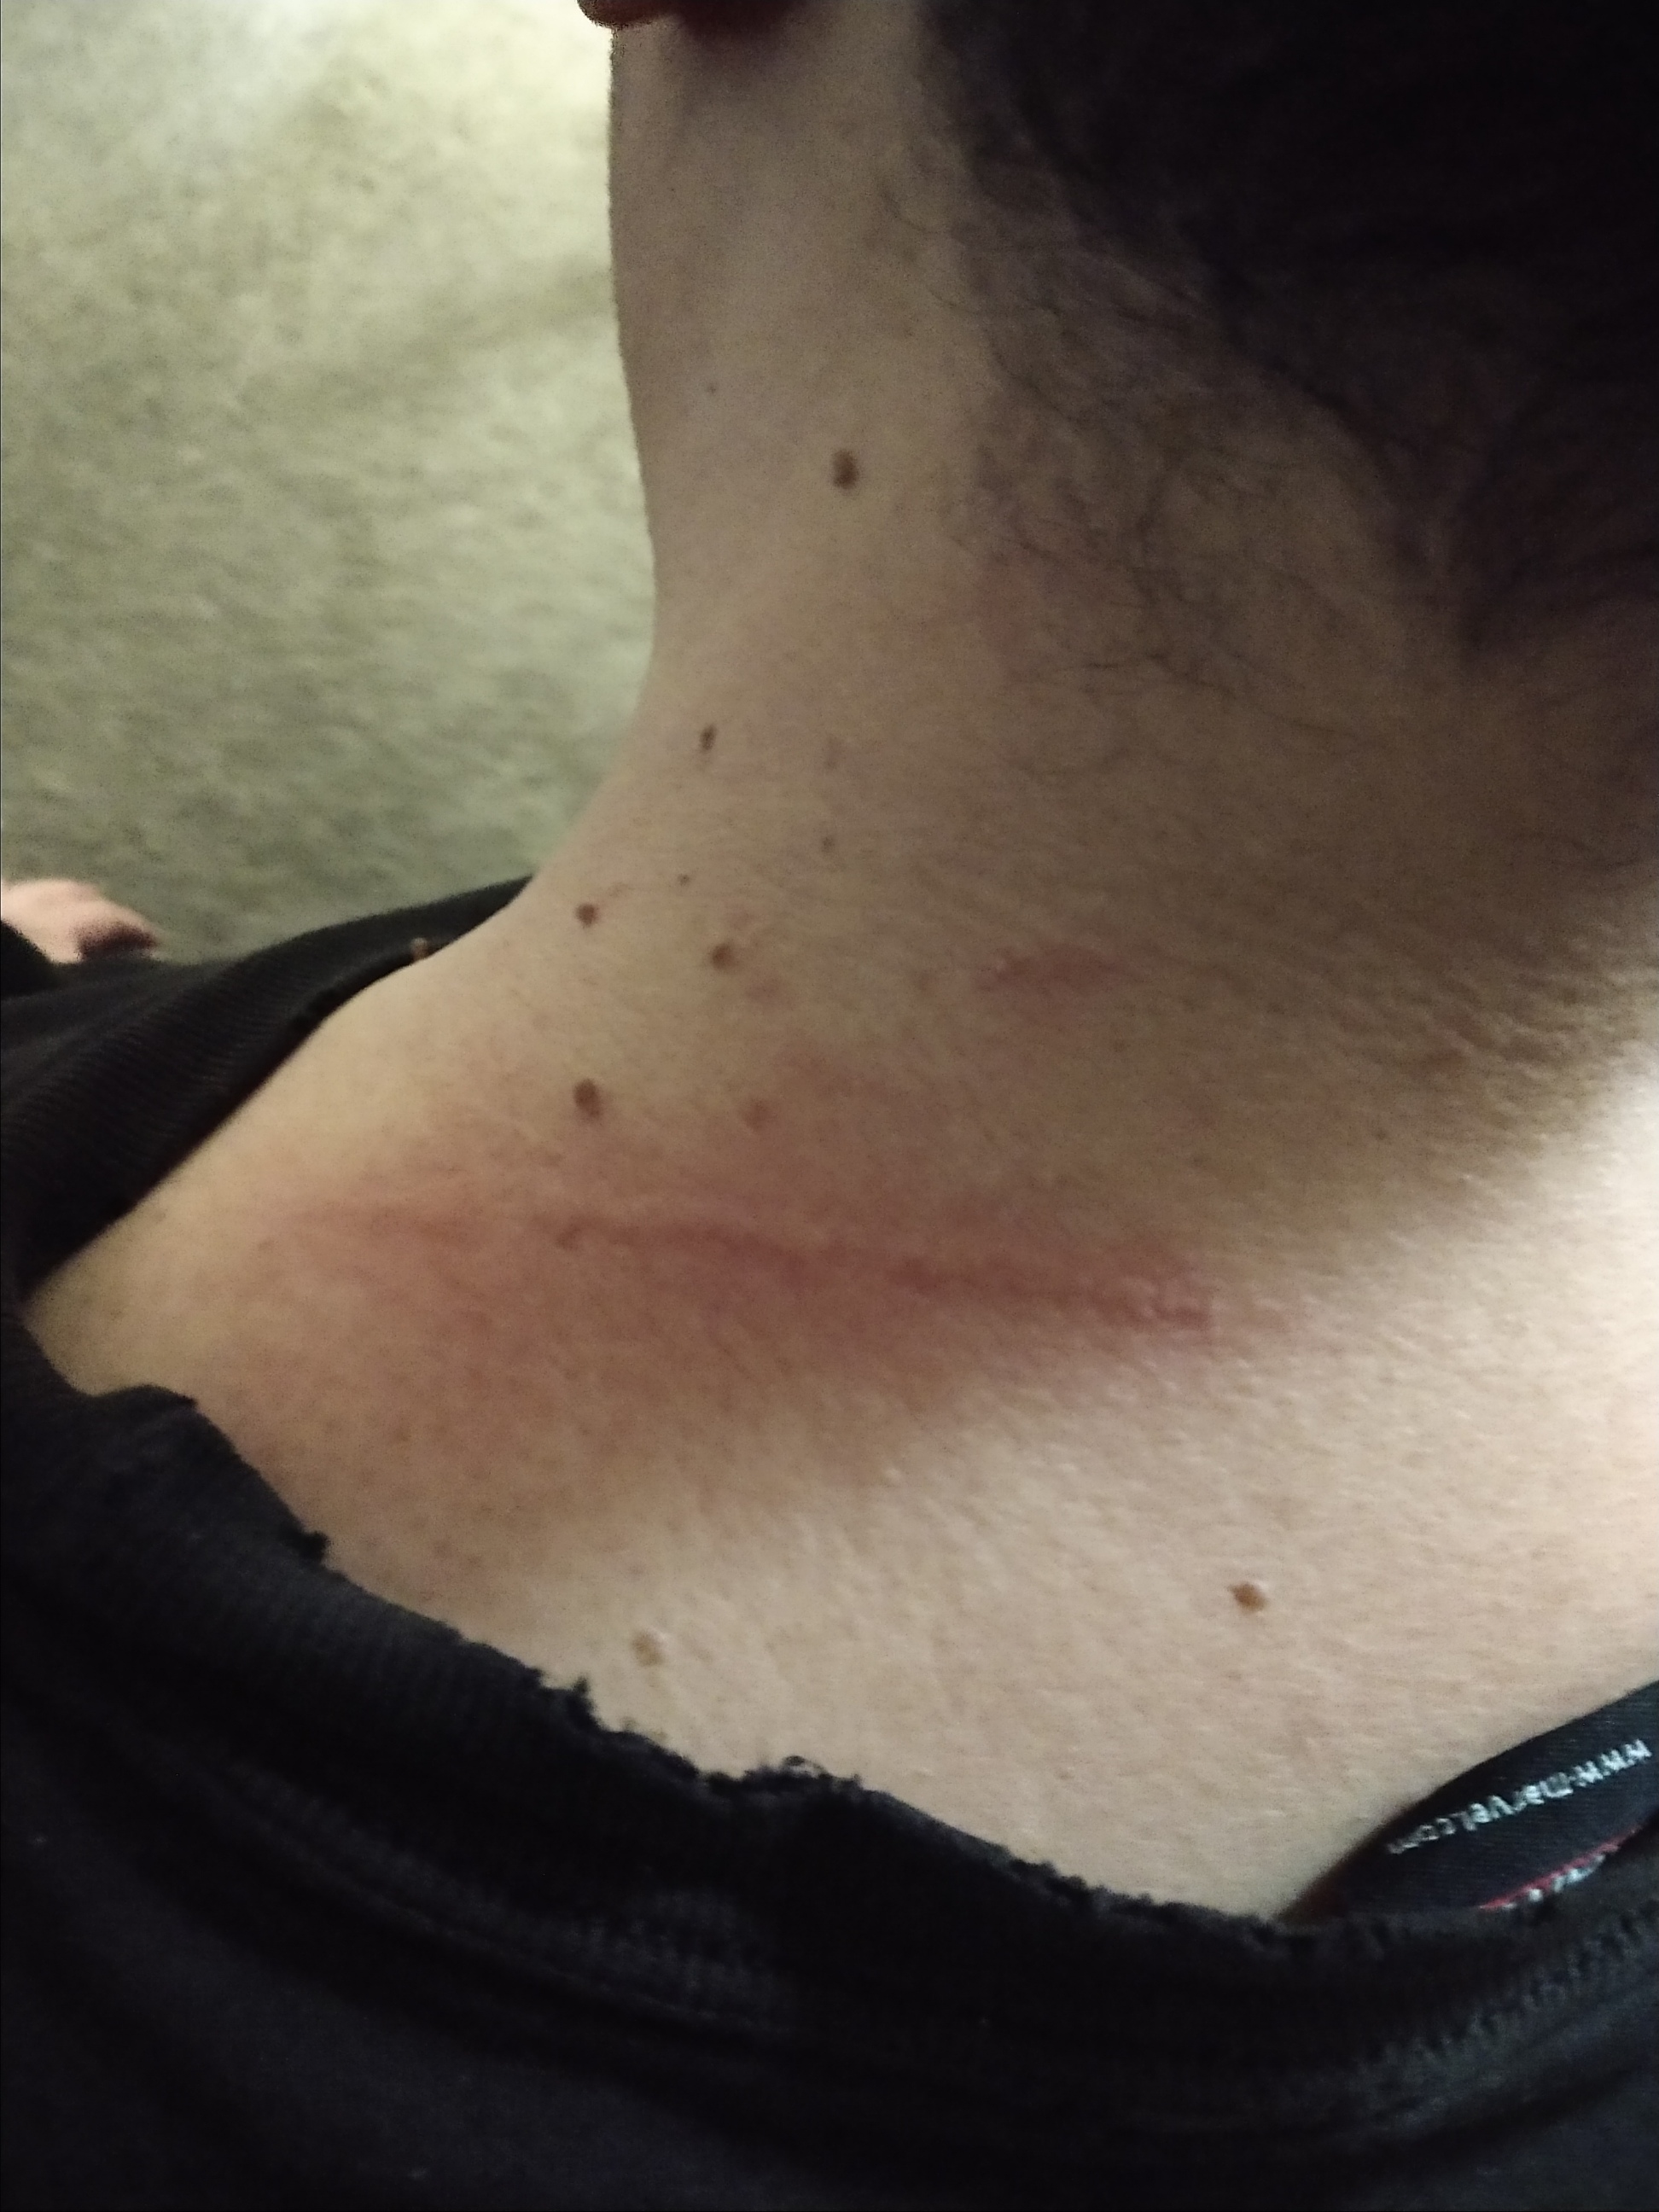 nasty welts on neck from sun 